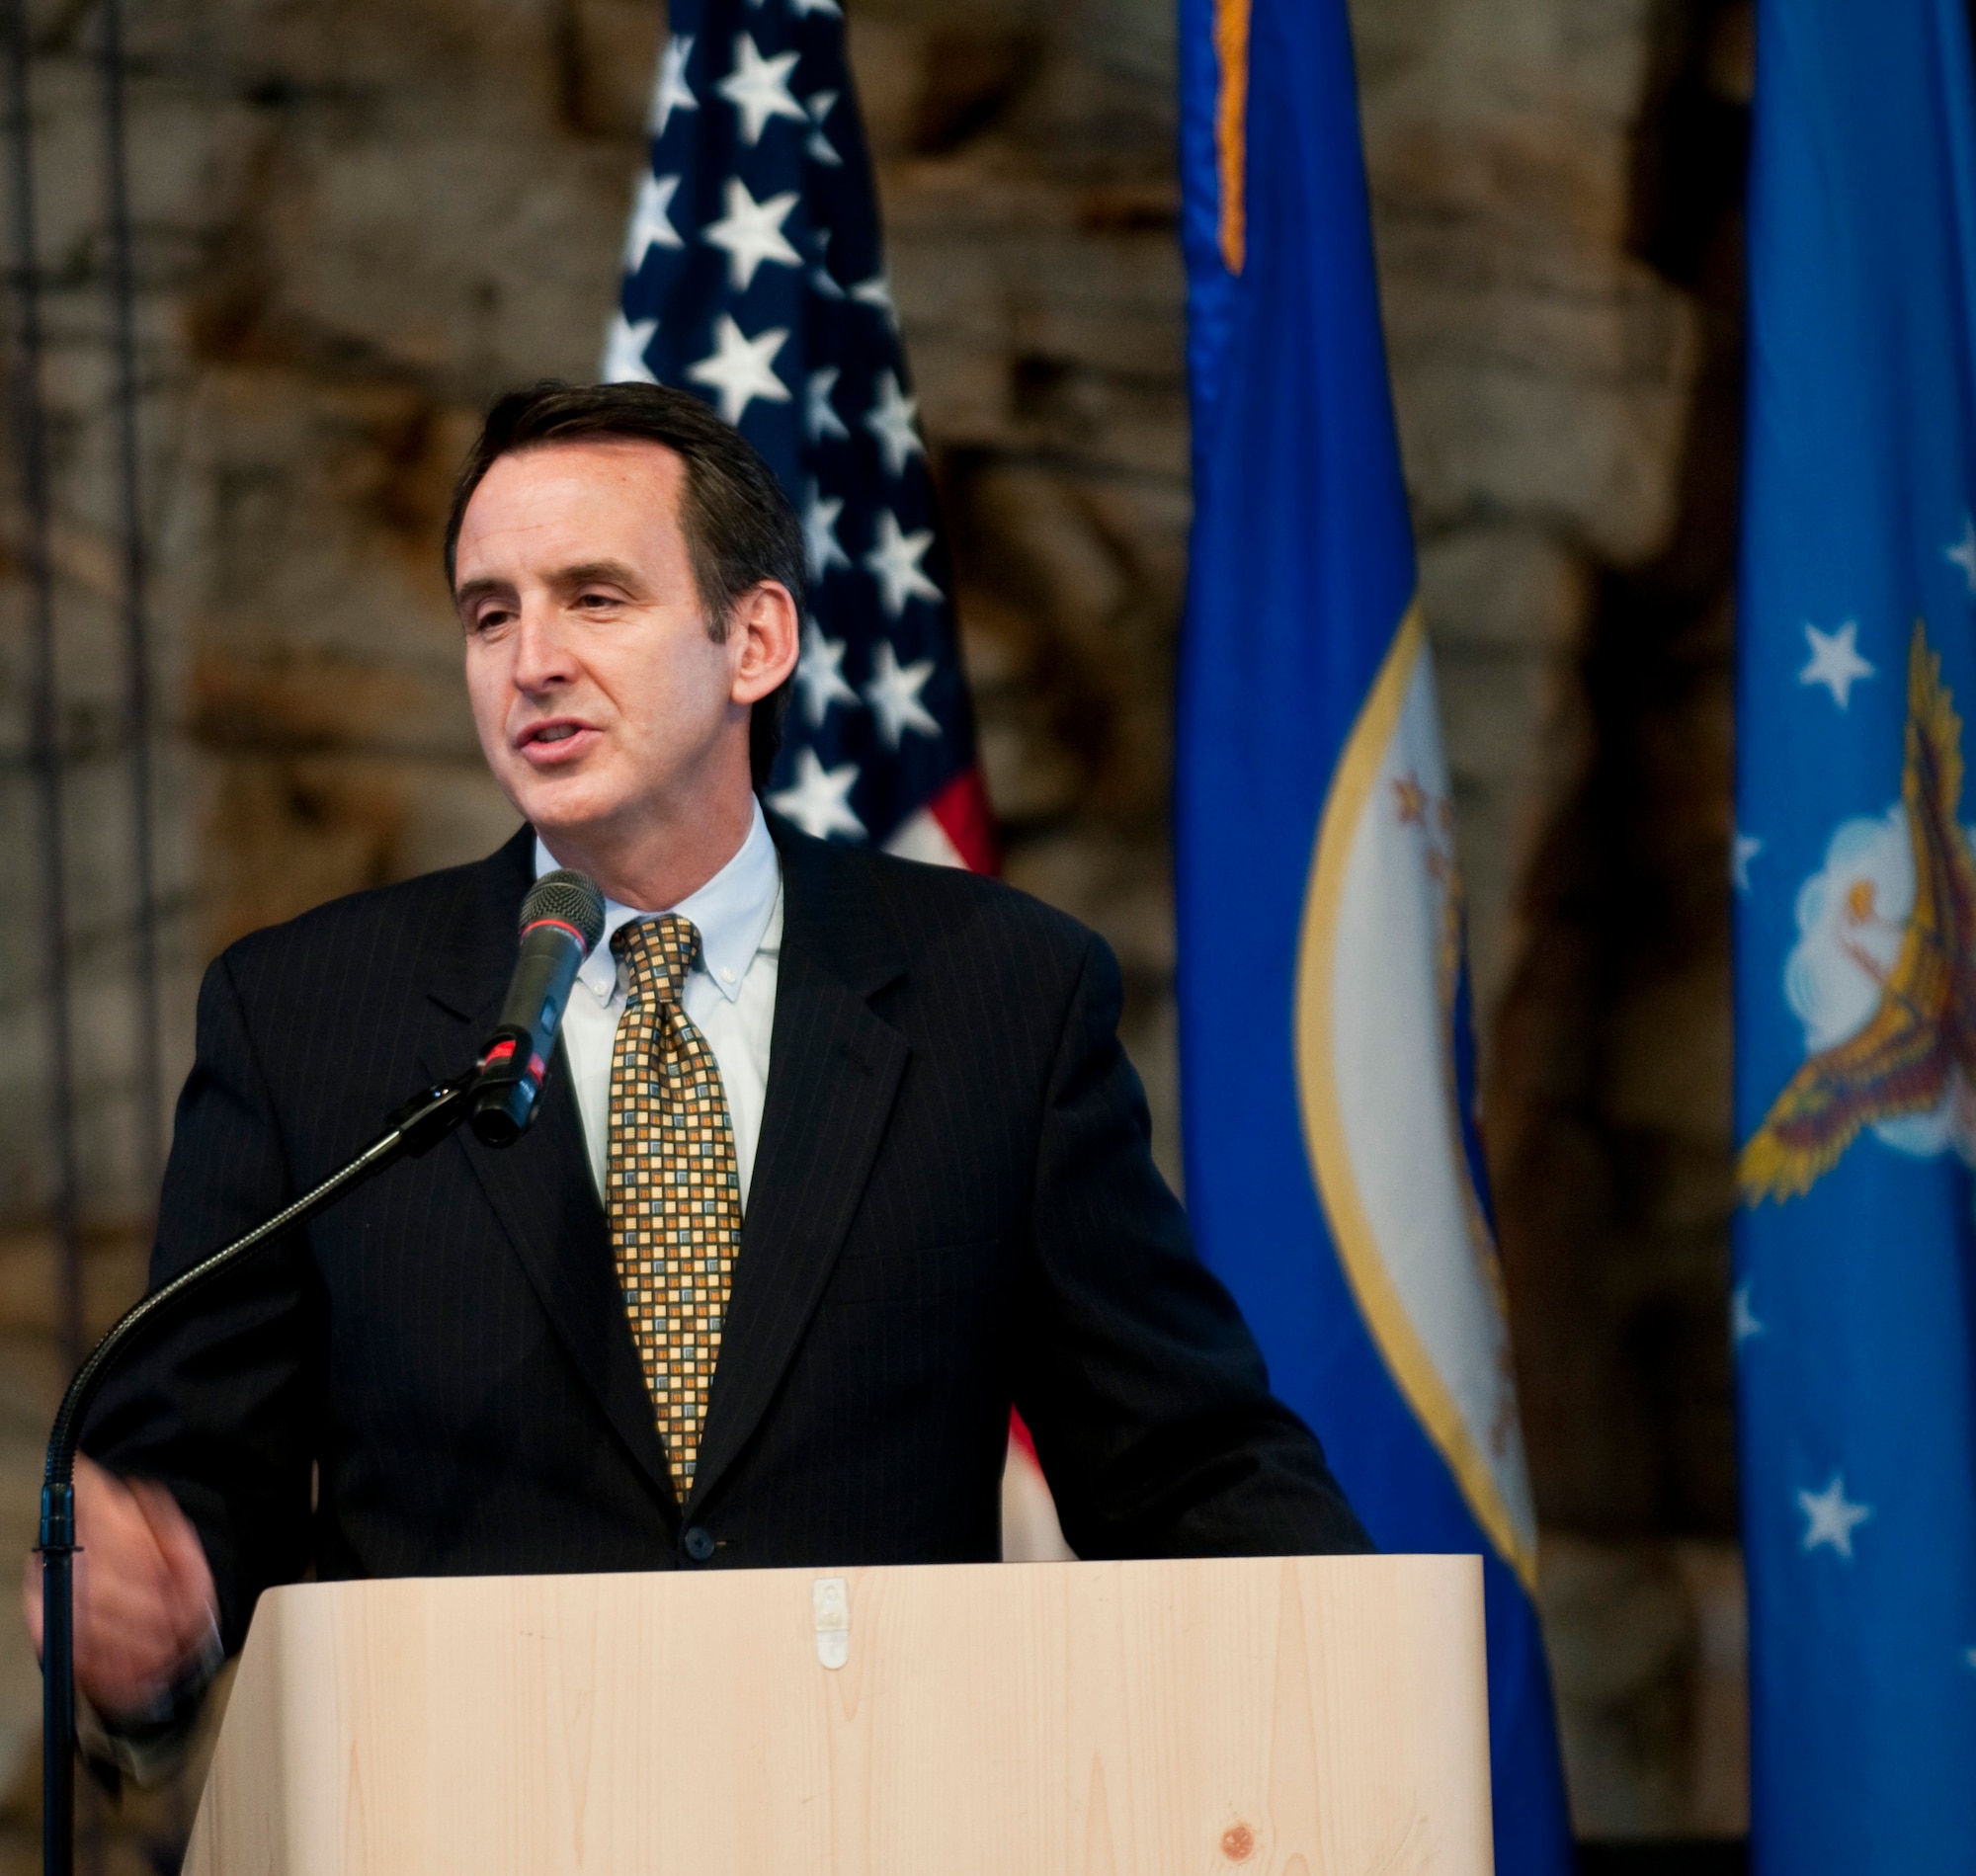 The Governor of Minnesota Tim Pawlenty thanks and praises Airmen during the 133rd Airlift Wing Recognition Ceremony in St. Paul, Minn. Dec. 11, 2010.
USAF photo by Tech. Sgt. Erik Gudmundson